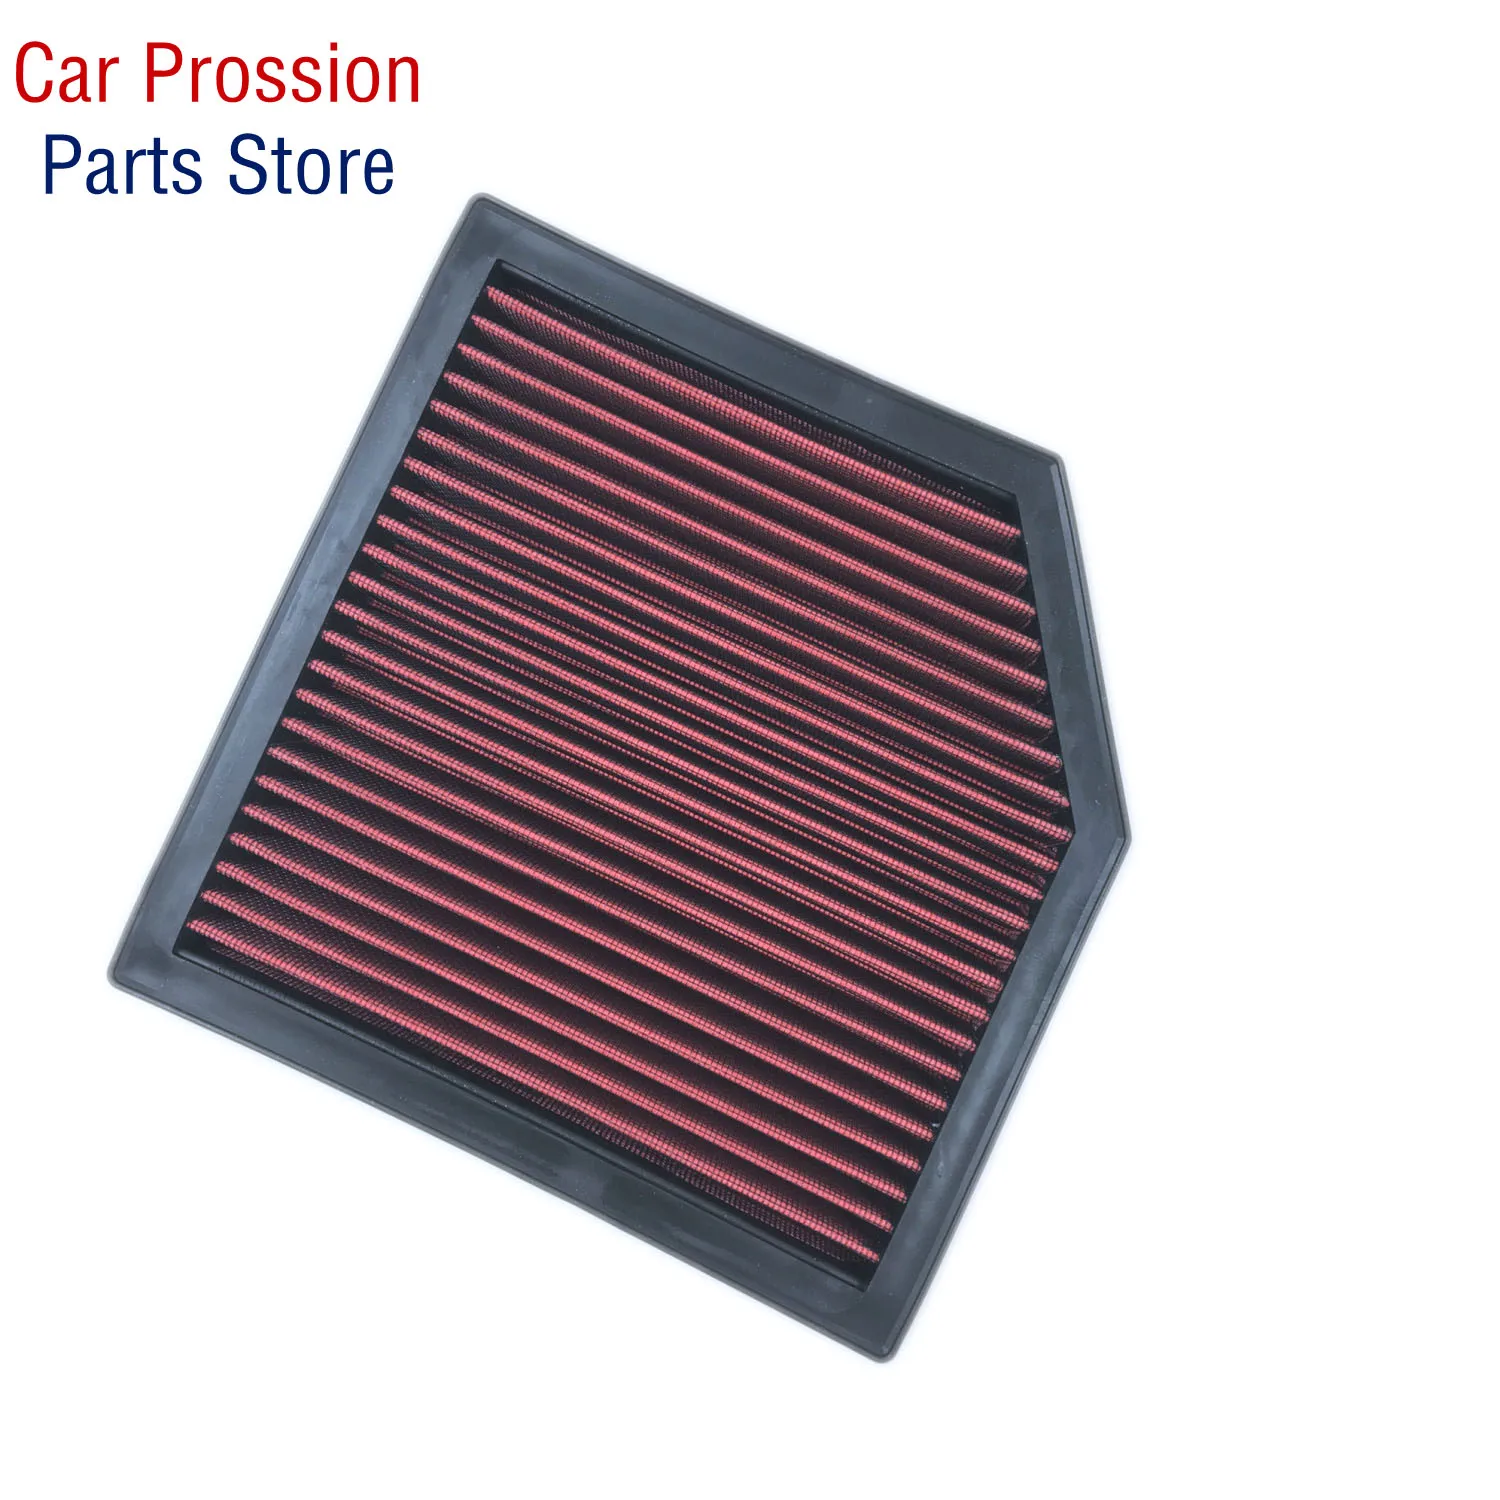 

Air Filter Fits for Lexus IS250 IS350 GS350 for Toyota Reiz Mark X RAV4 OEM 1780131110 Performance Replacement Panel